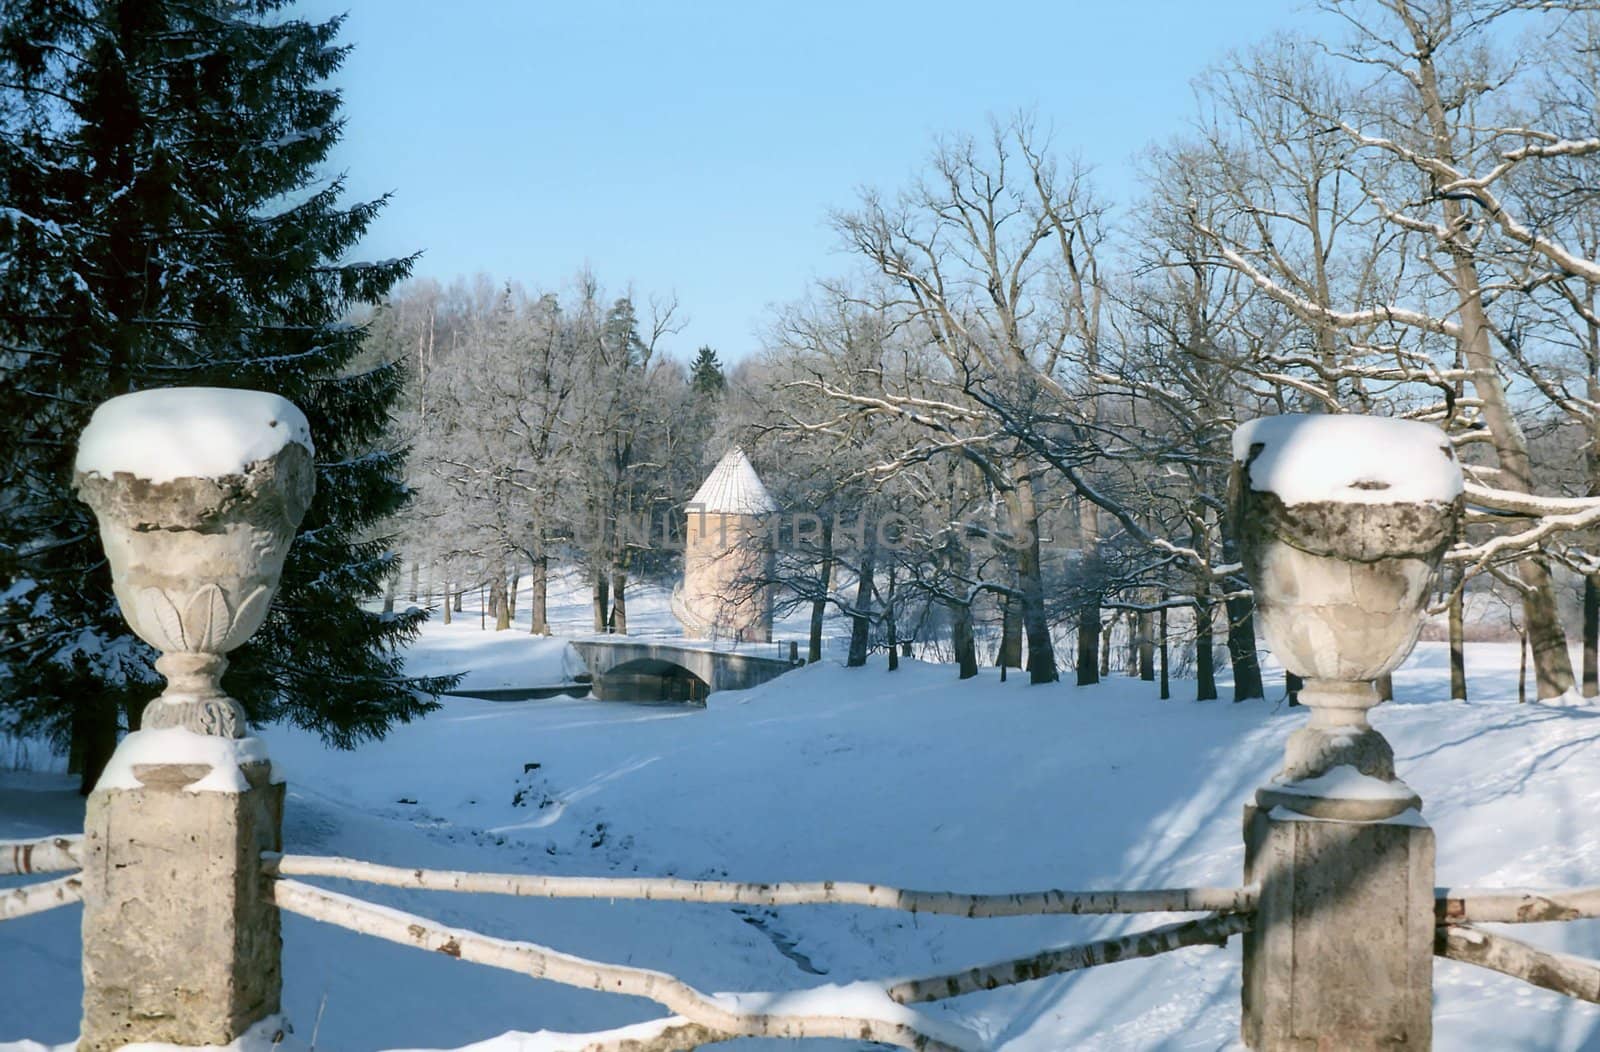 View of the winter park with vase decoration